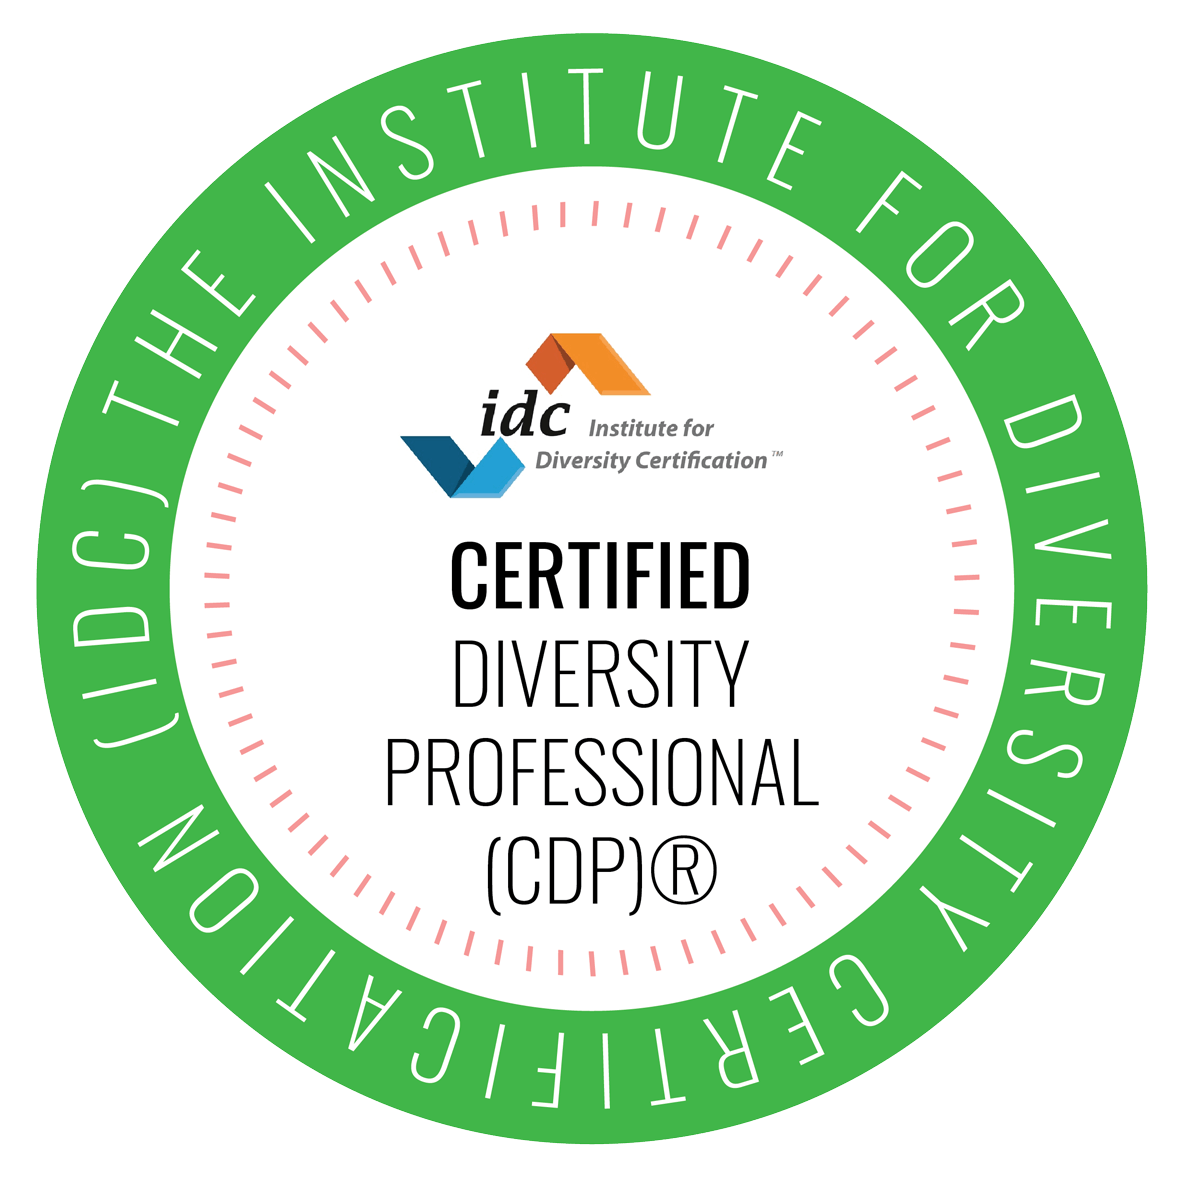 Certified Diversity Professional (CDP)®